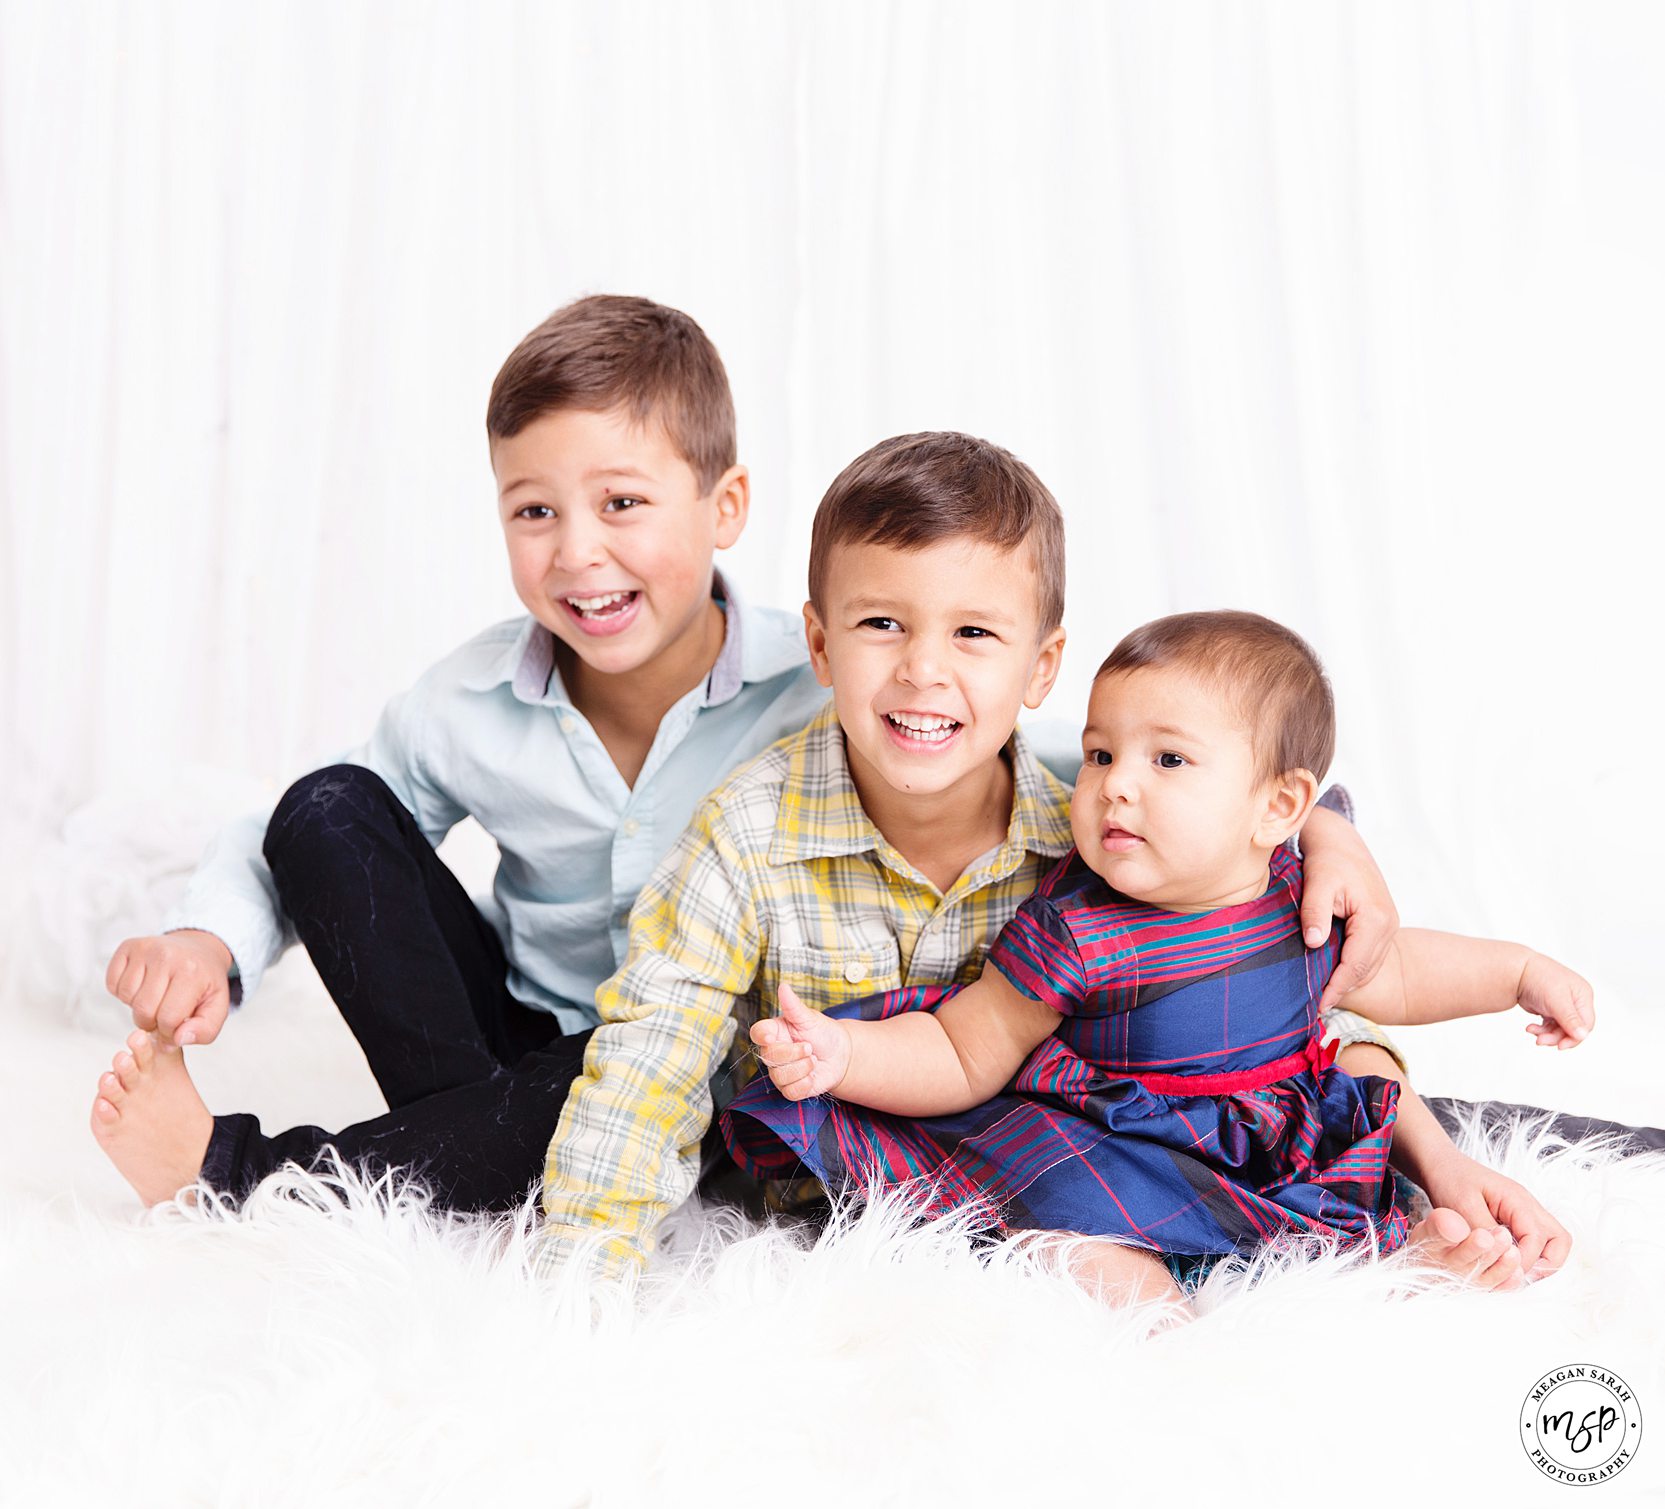 Family,Family Photo shoot,Family pictures,Fun,Leeds,Pictures,Portraits,Siblings,Studio Photographer,Twins,